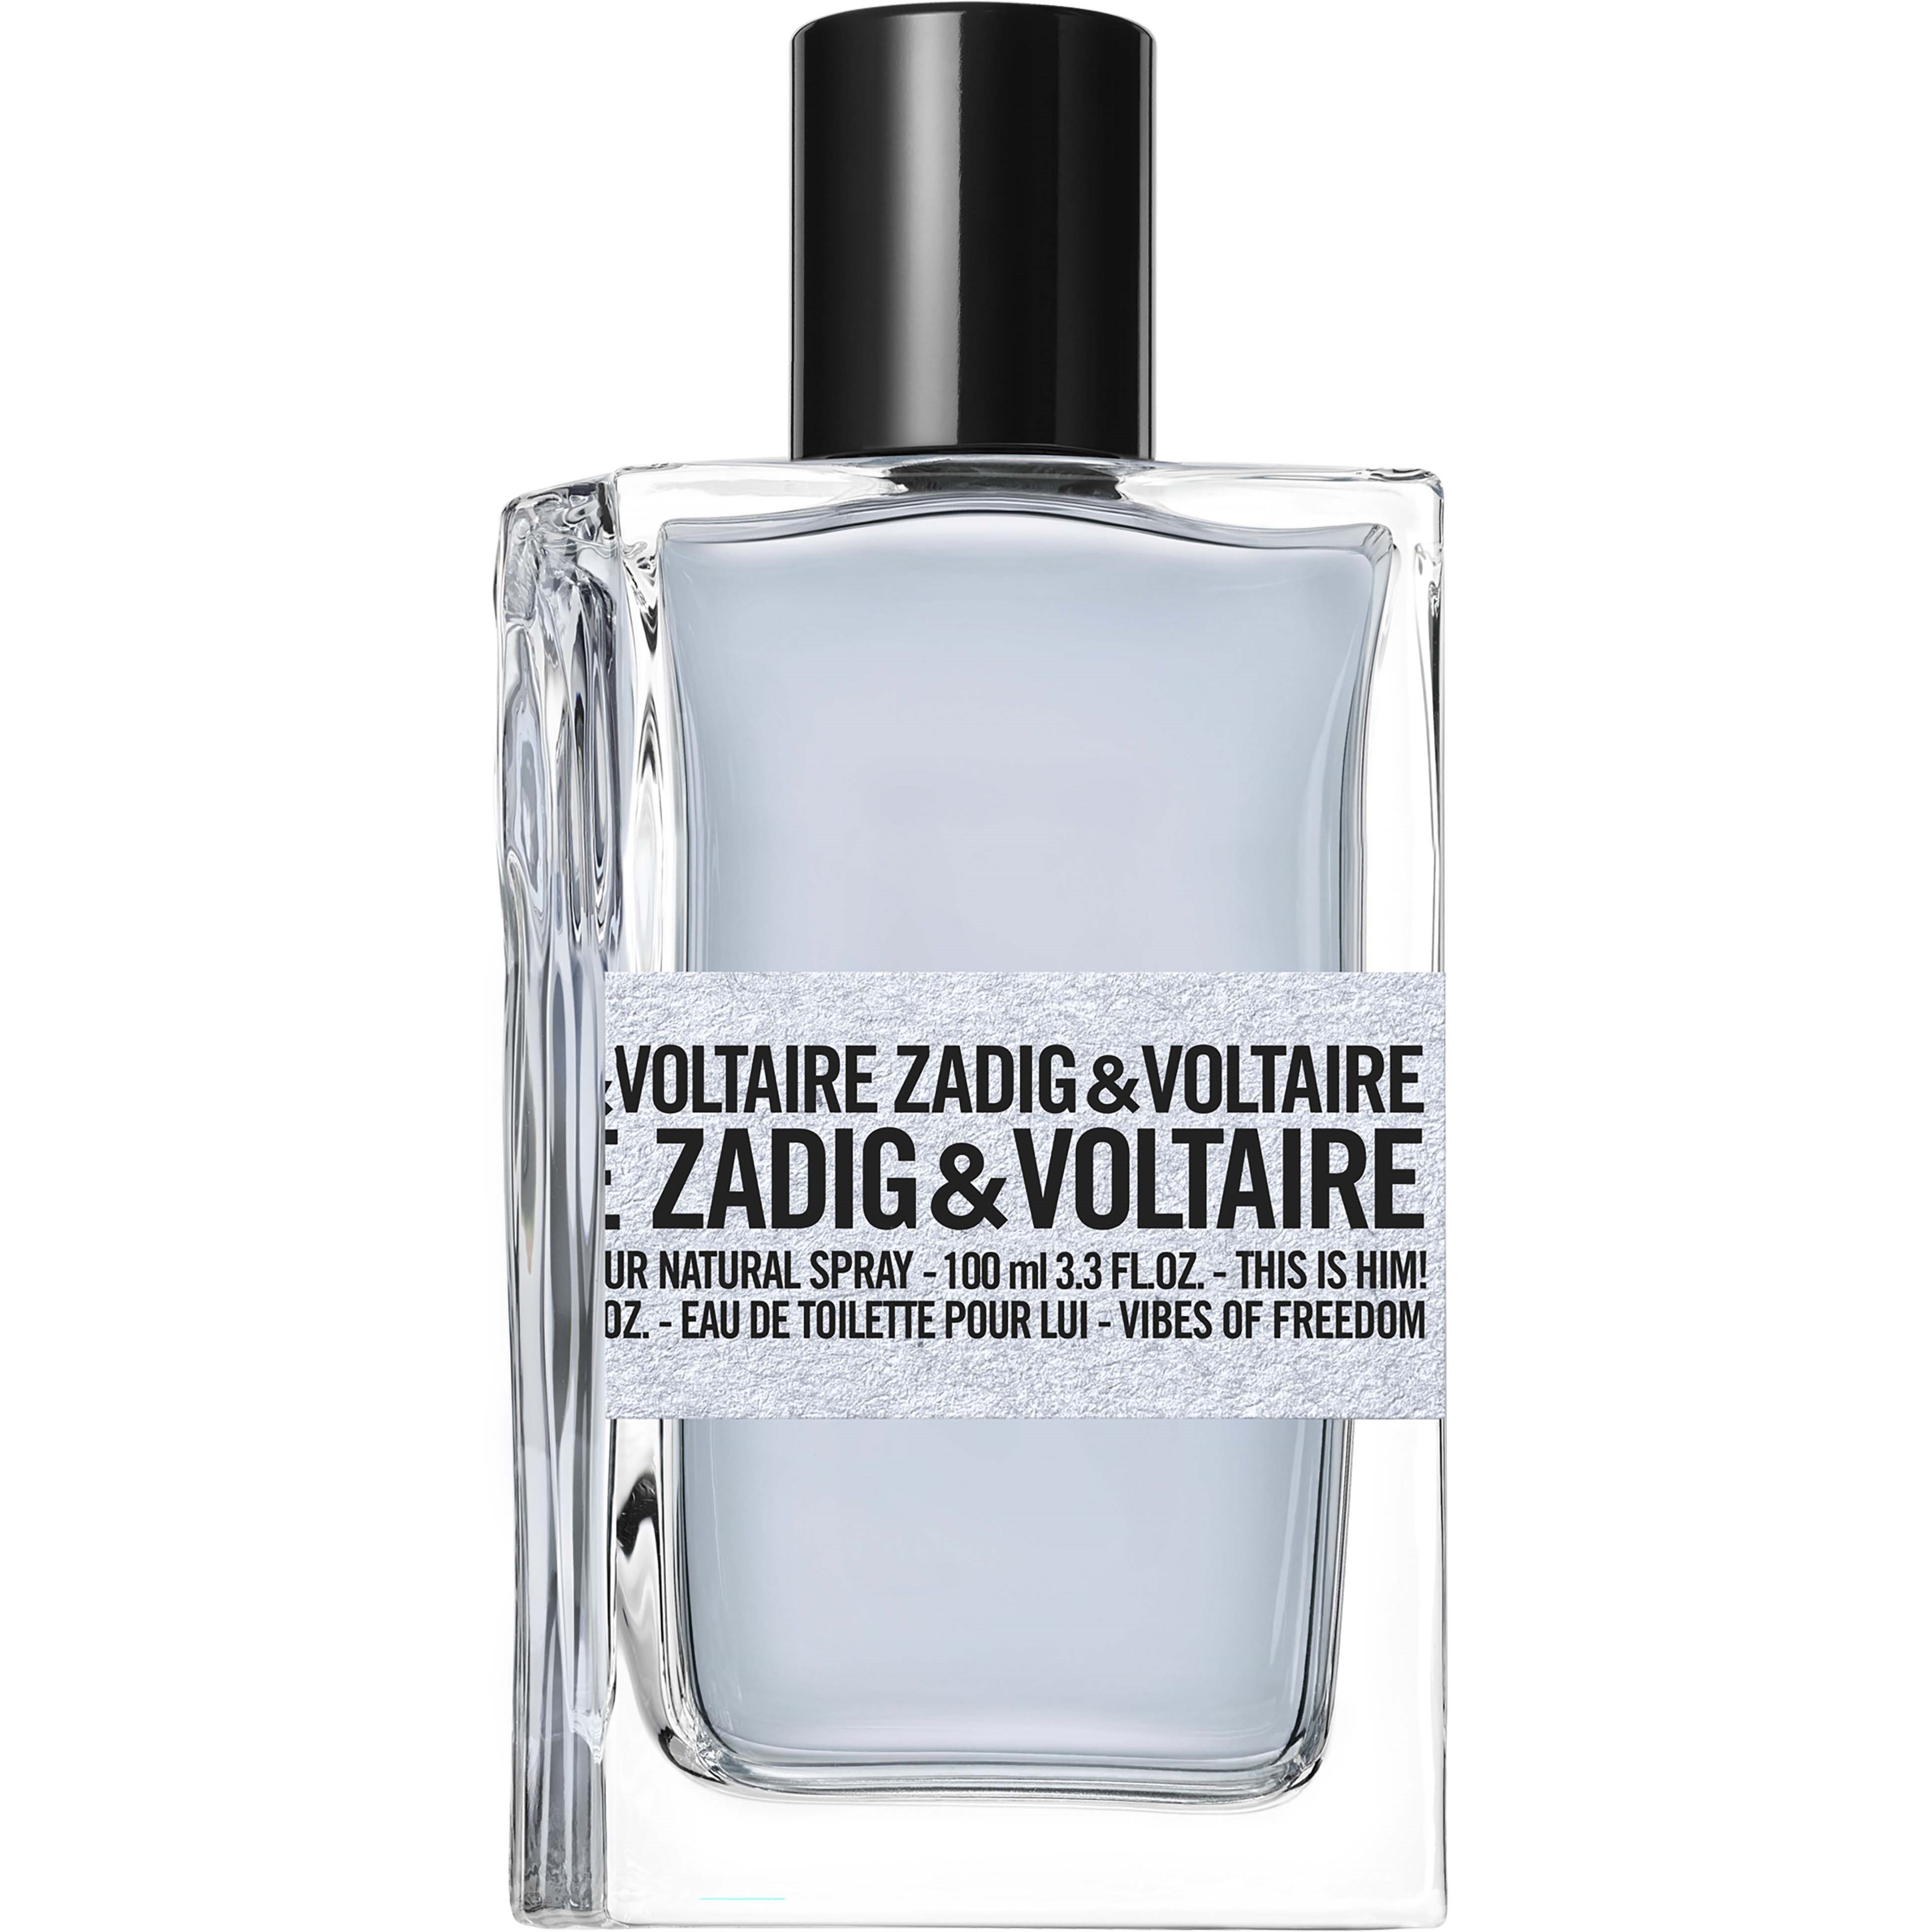 Zadig & Voltaire This is Him! Vibes of Freedom Eau de Toilette 100 ml